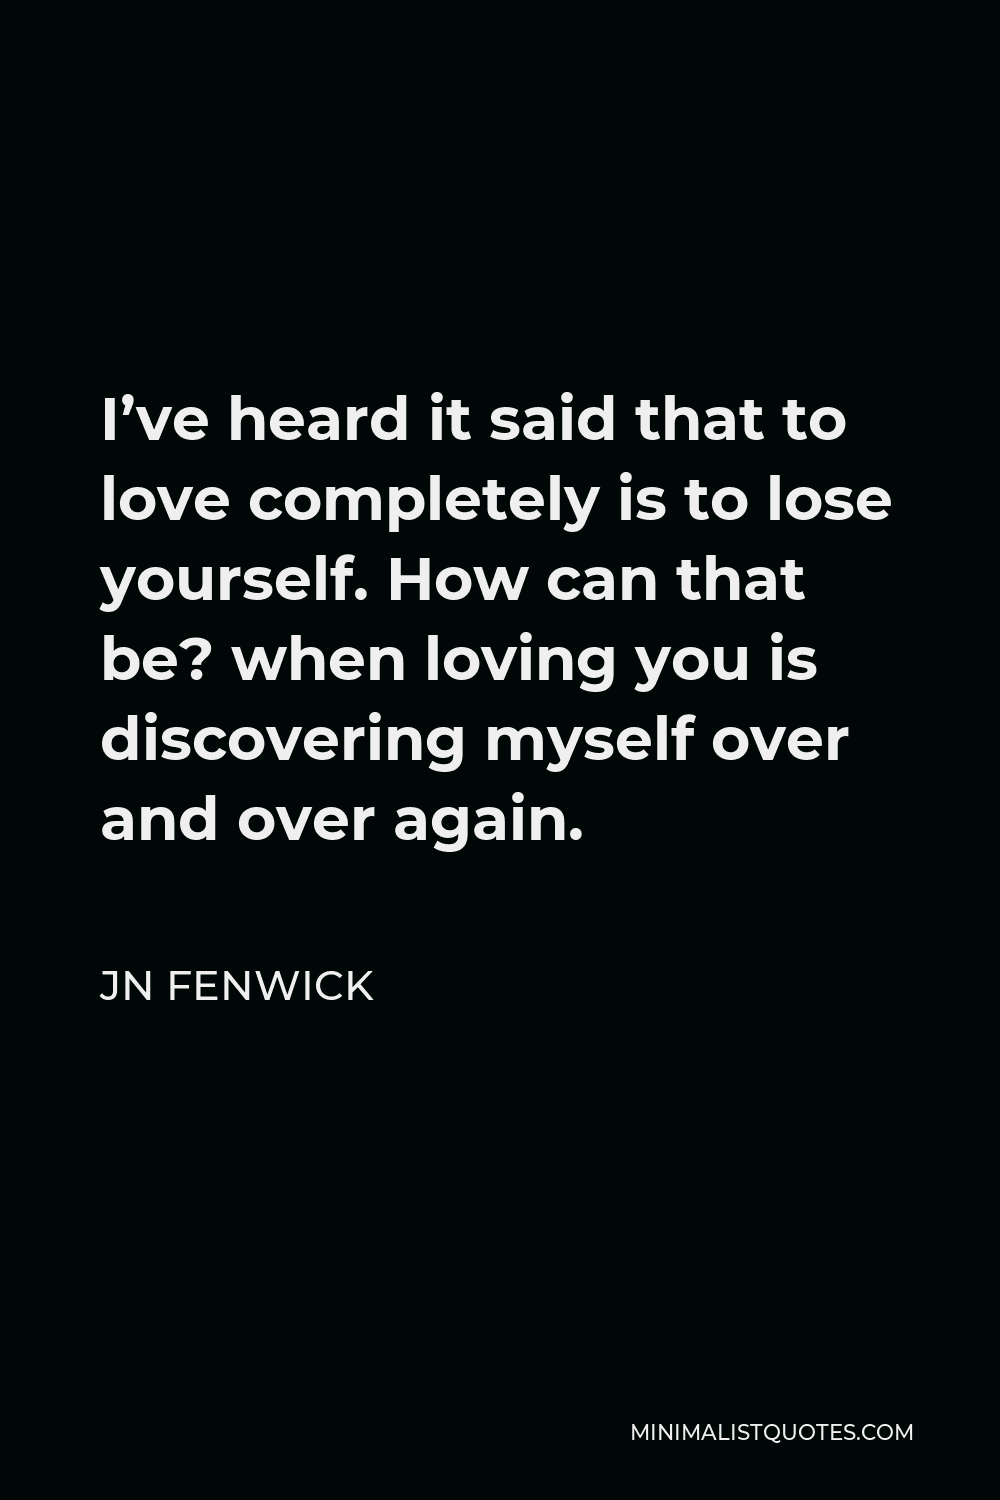 JN Fenwick Quote - I’ve heard it said that to love completely is to lose yourself. How can that be? when loving you is discovering myself over and over again.